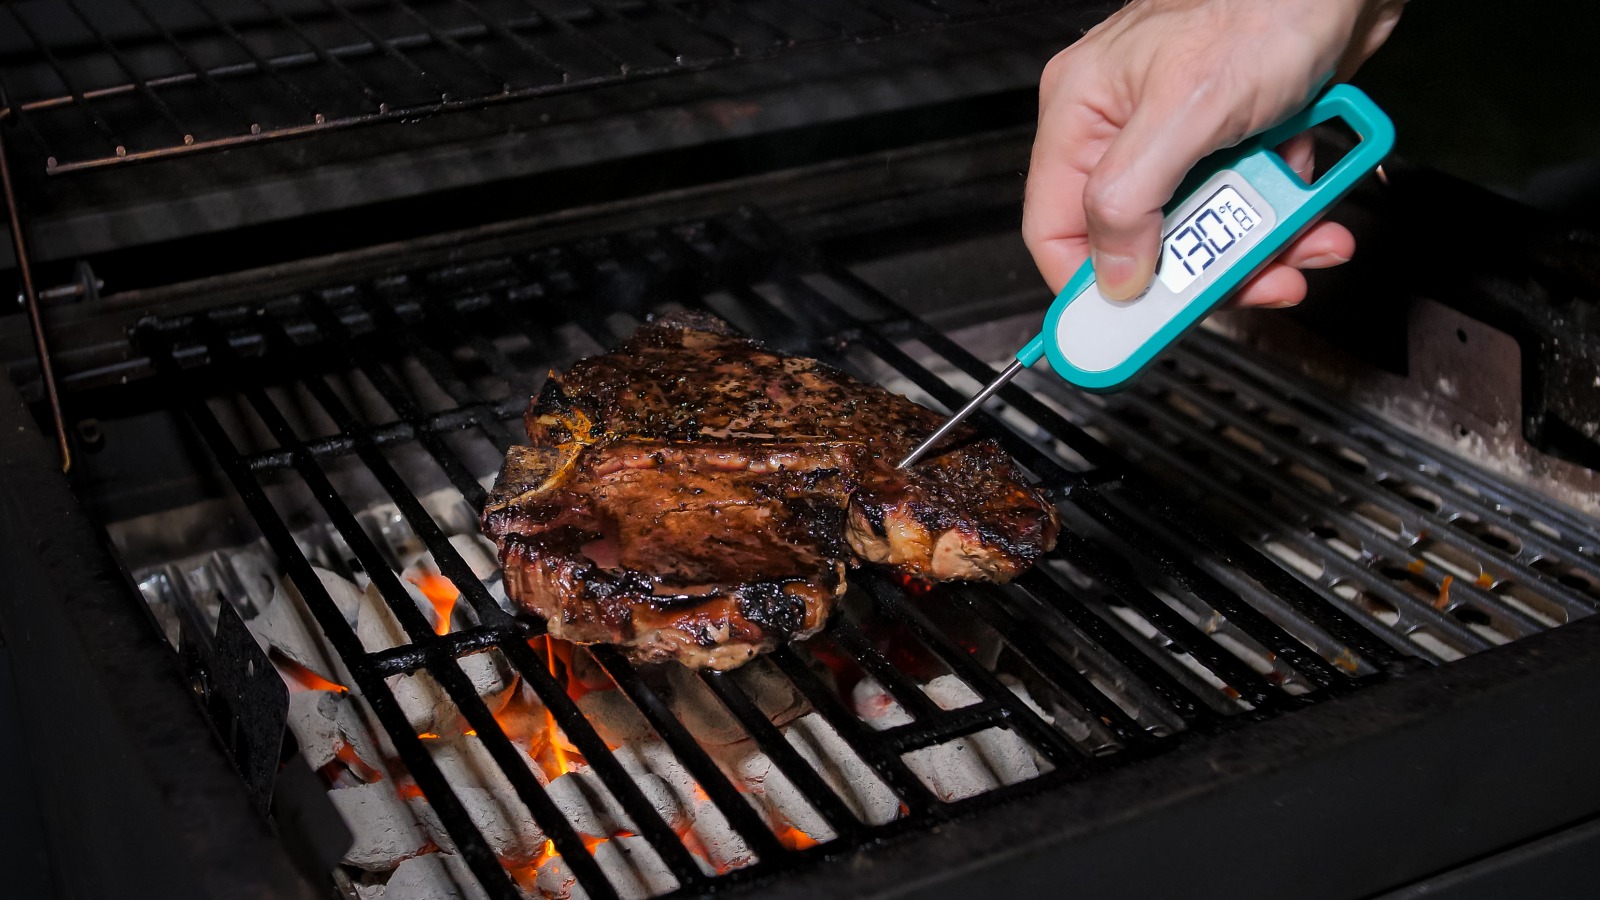 https://www.mashed.com/img/gallery/the-reason-you-should-be-using-a-meat-thermometer/l-intro-1602621525.jpg